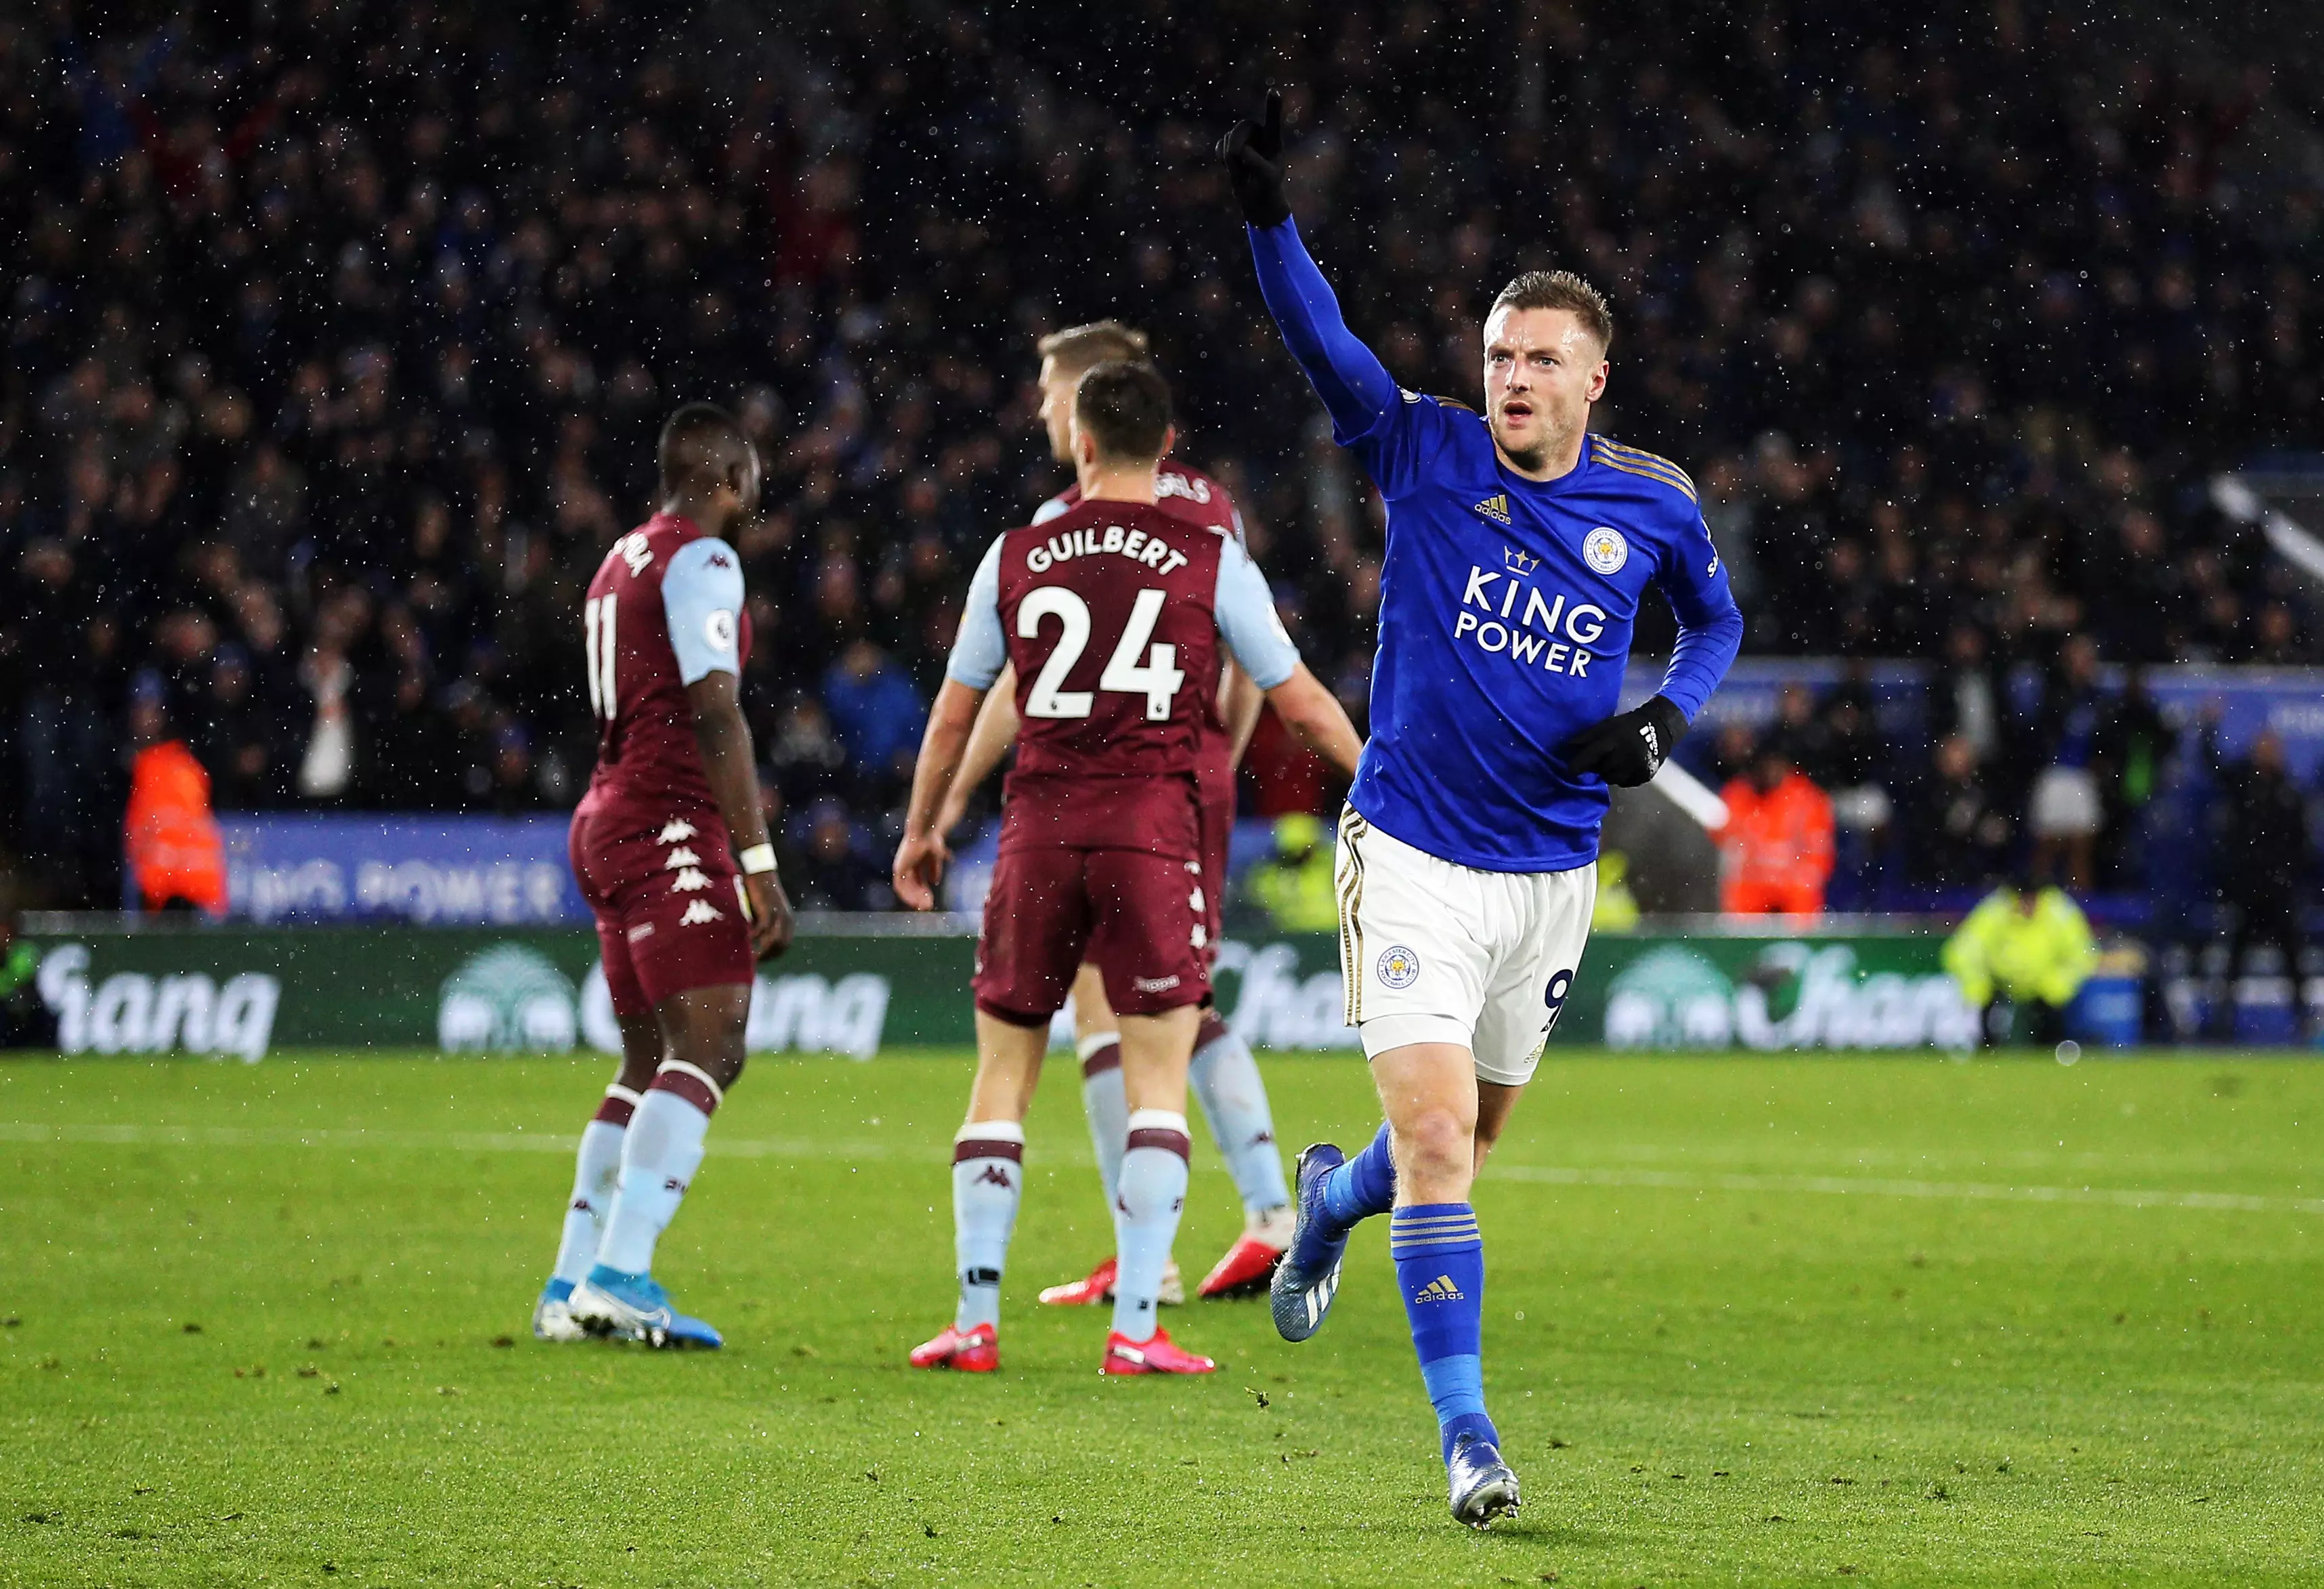 Leicester's 4-0 win over Aston Villa was the most recent Premier League game. Image: PA Images